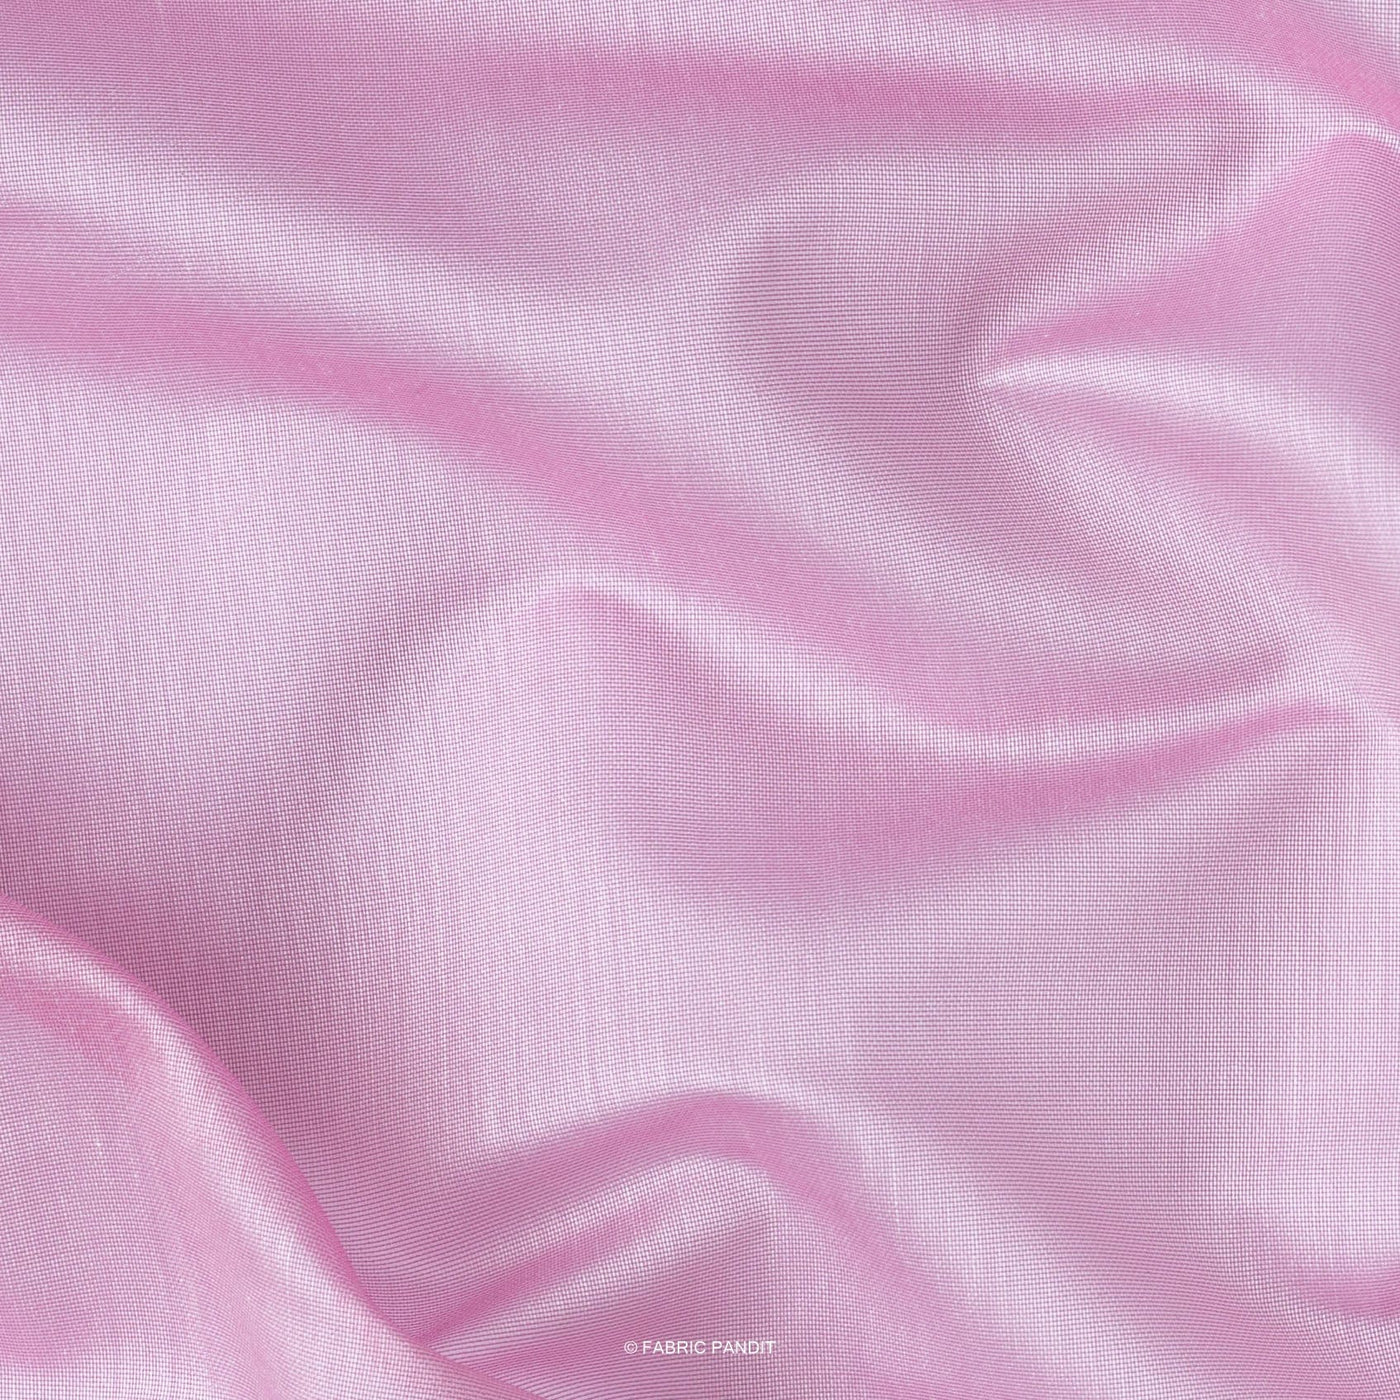 Fabric Pandit Fabric Light Pink Color Plain Chanderi Fabric (Width 43 Inches)